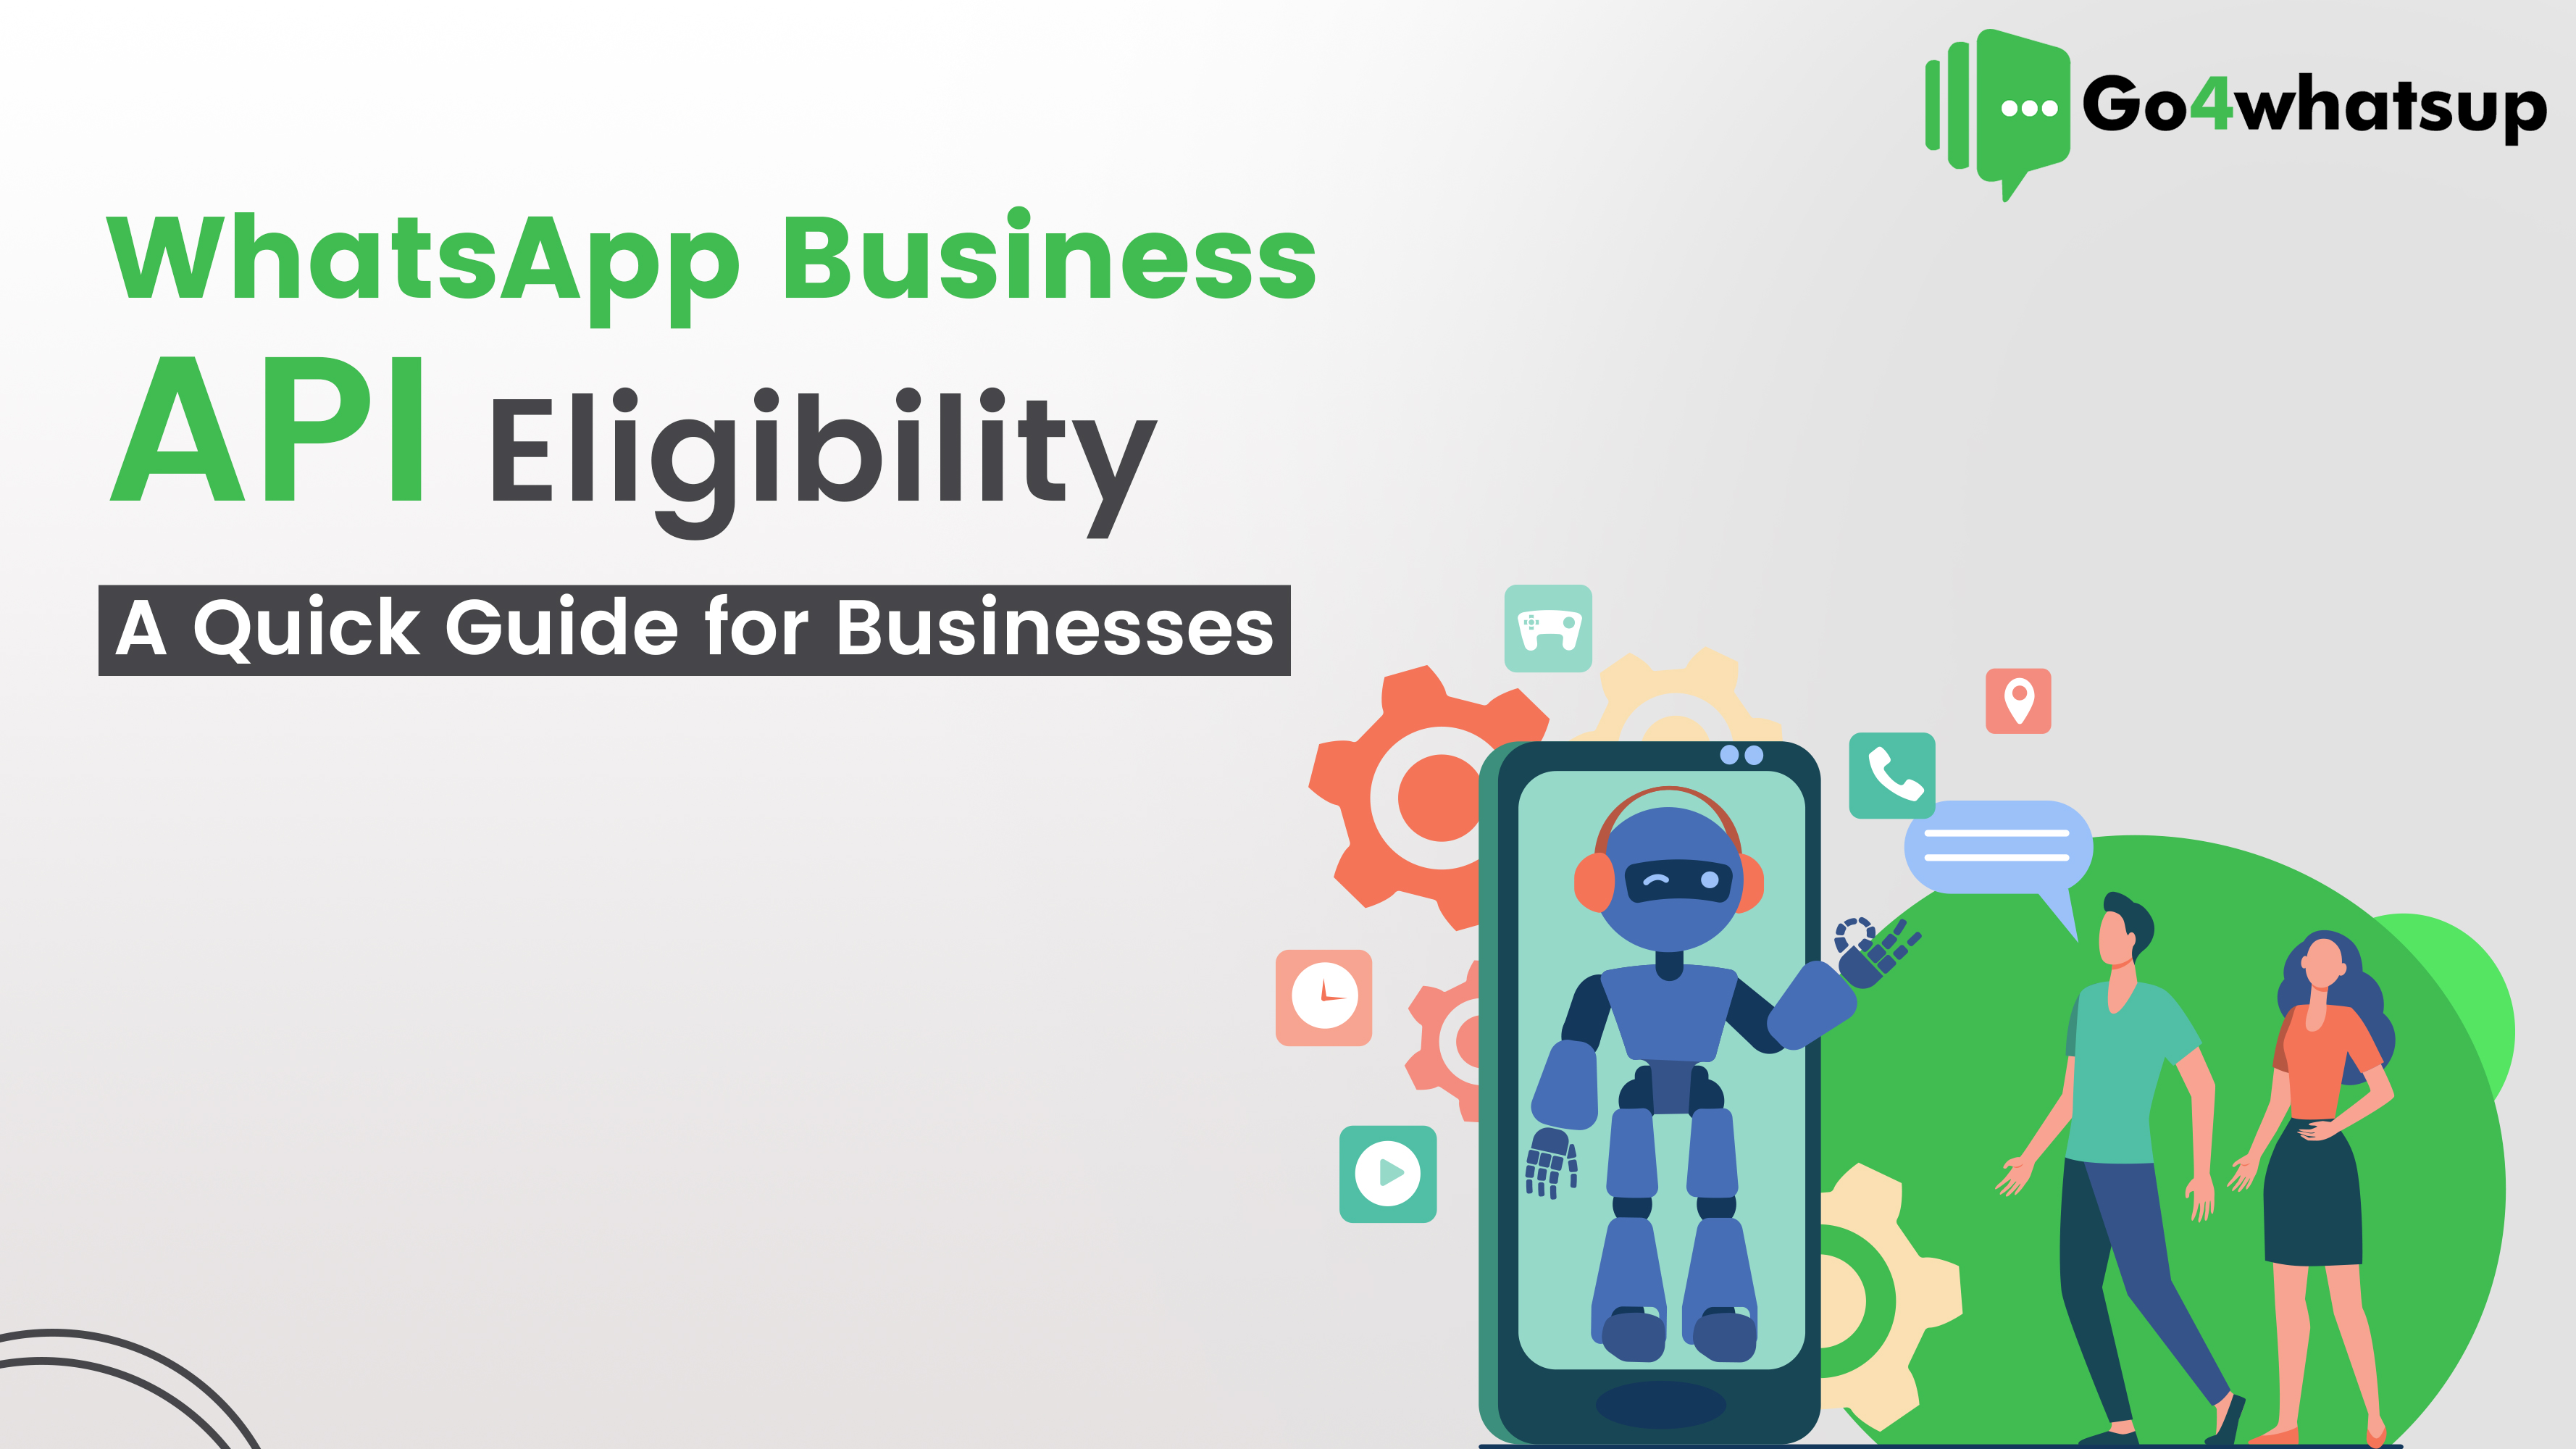 WhatsApp Business API Eligibility: A Quick Guide for Businesses